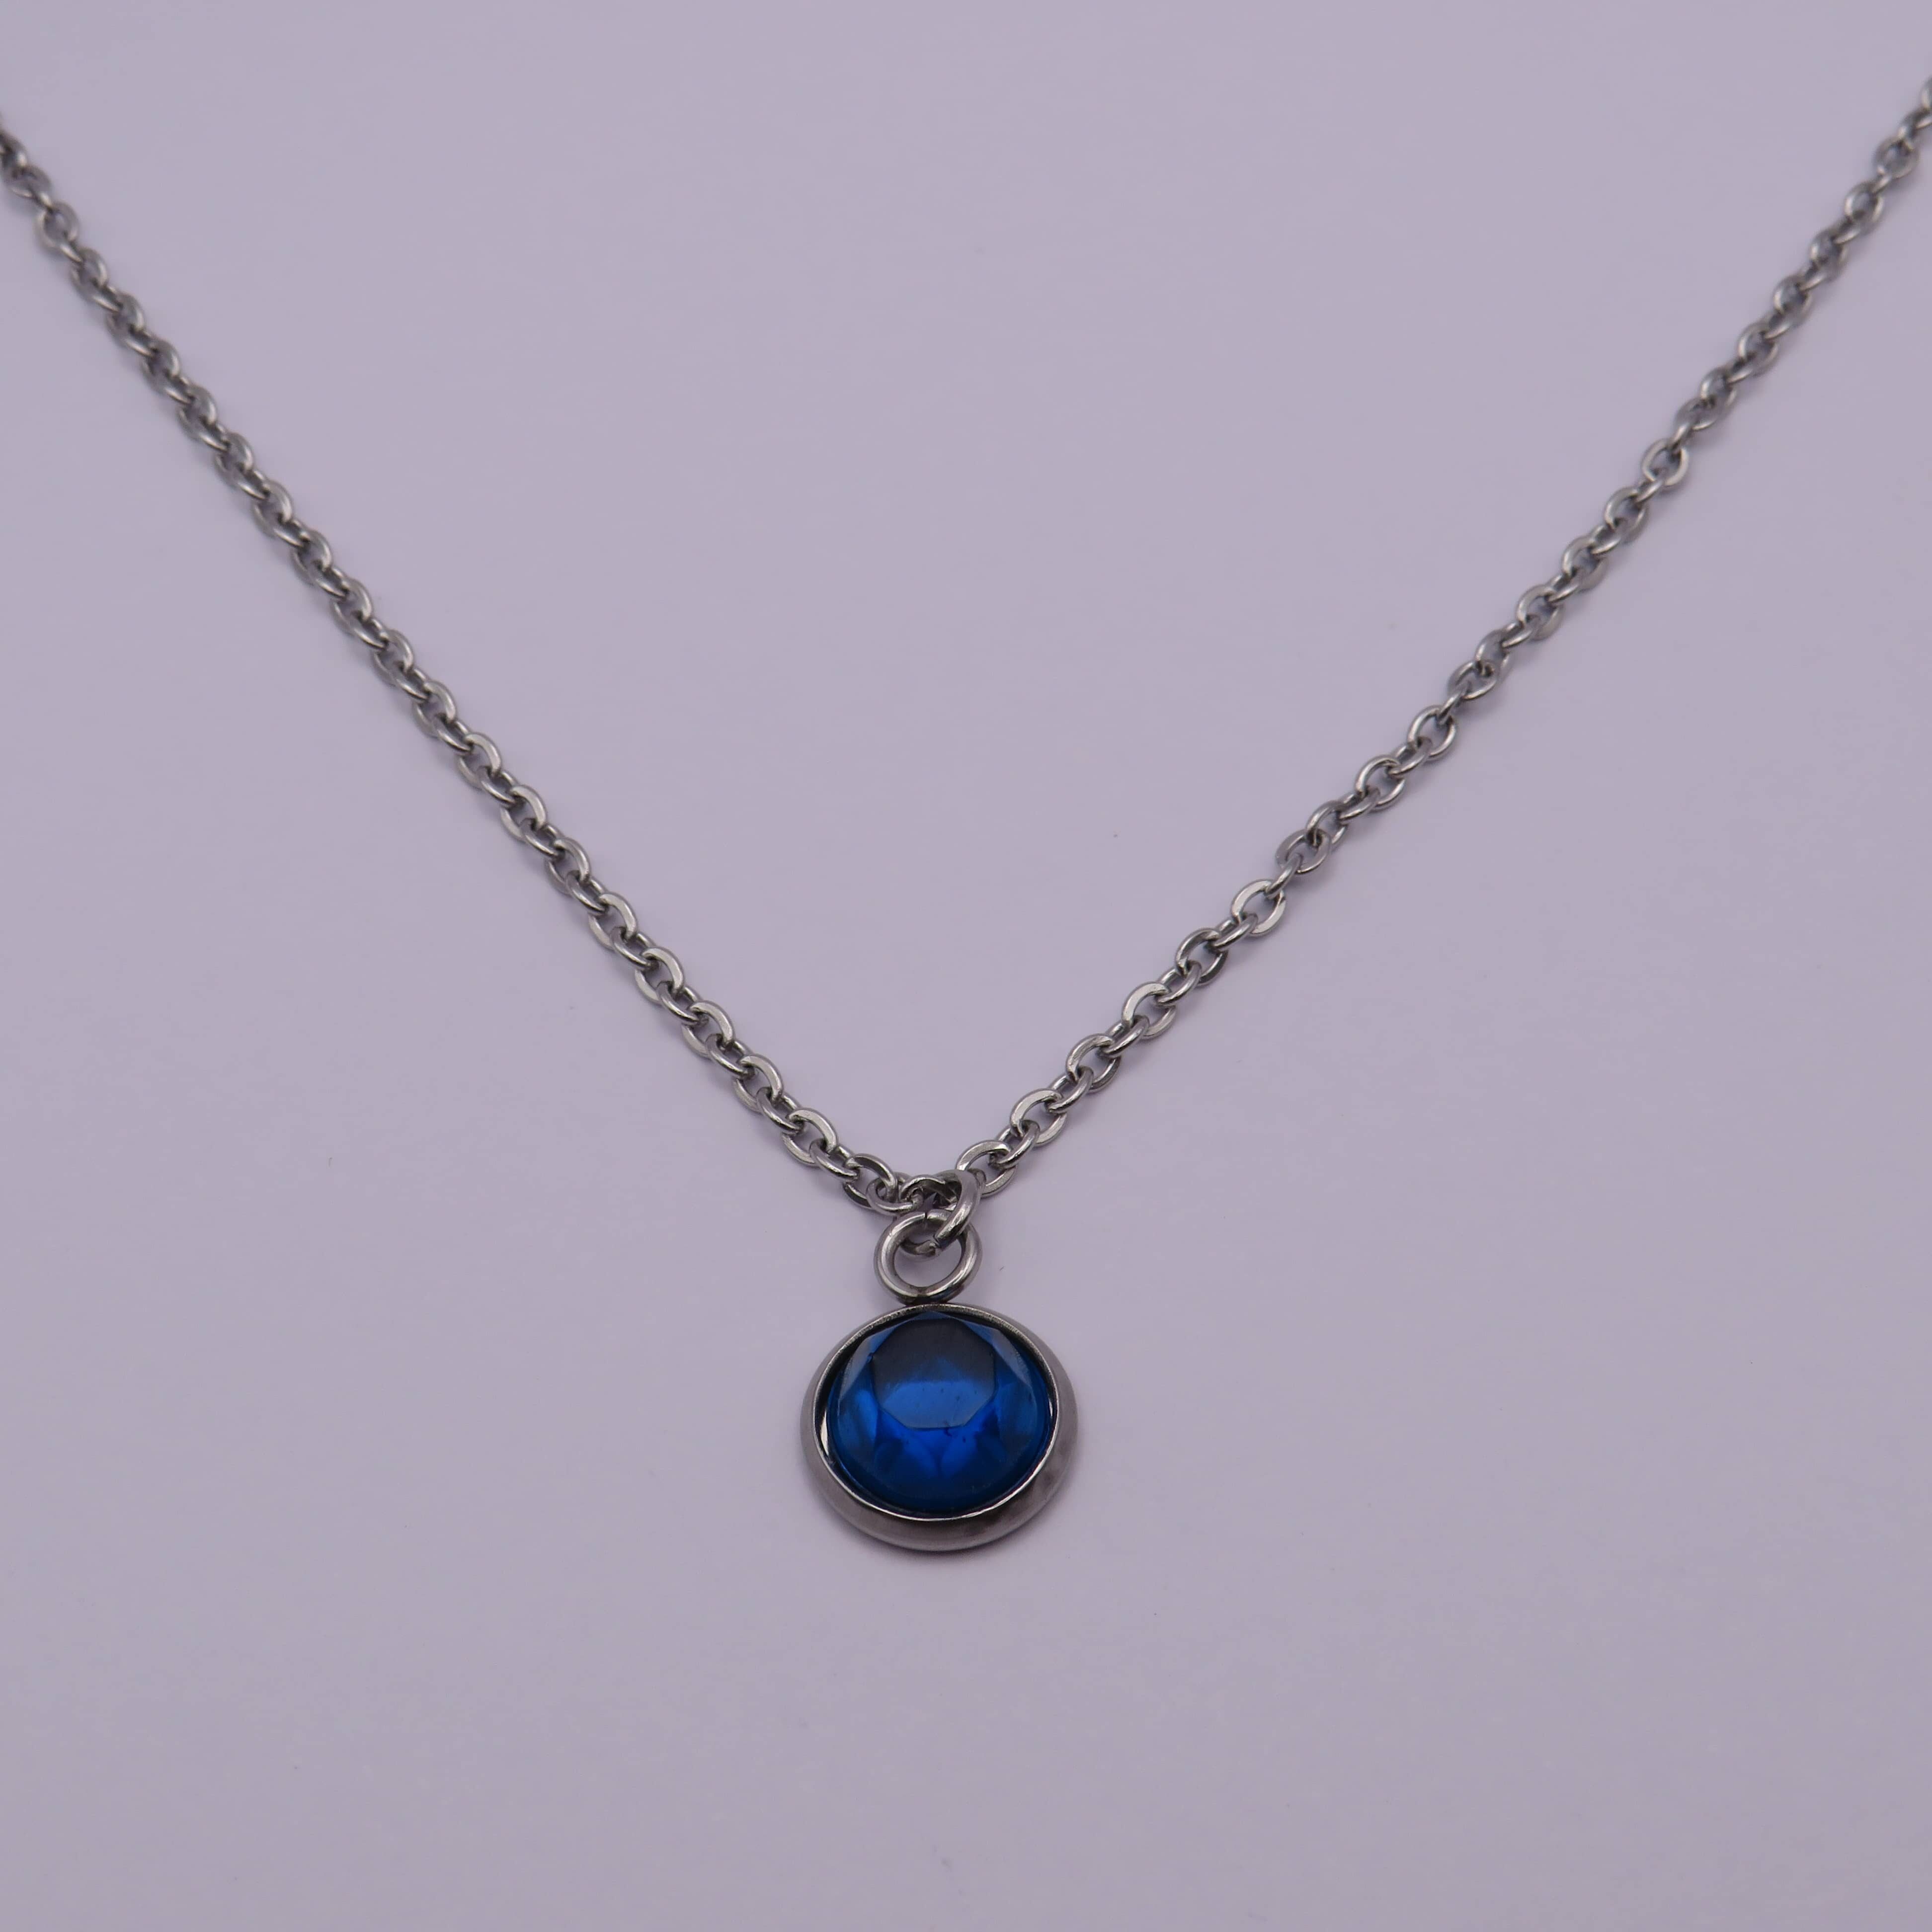 Stainless Steel Blue Cabochon Necklace